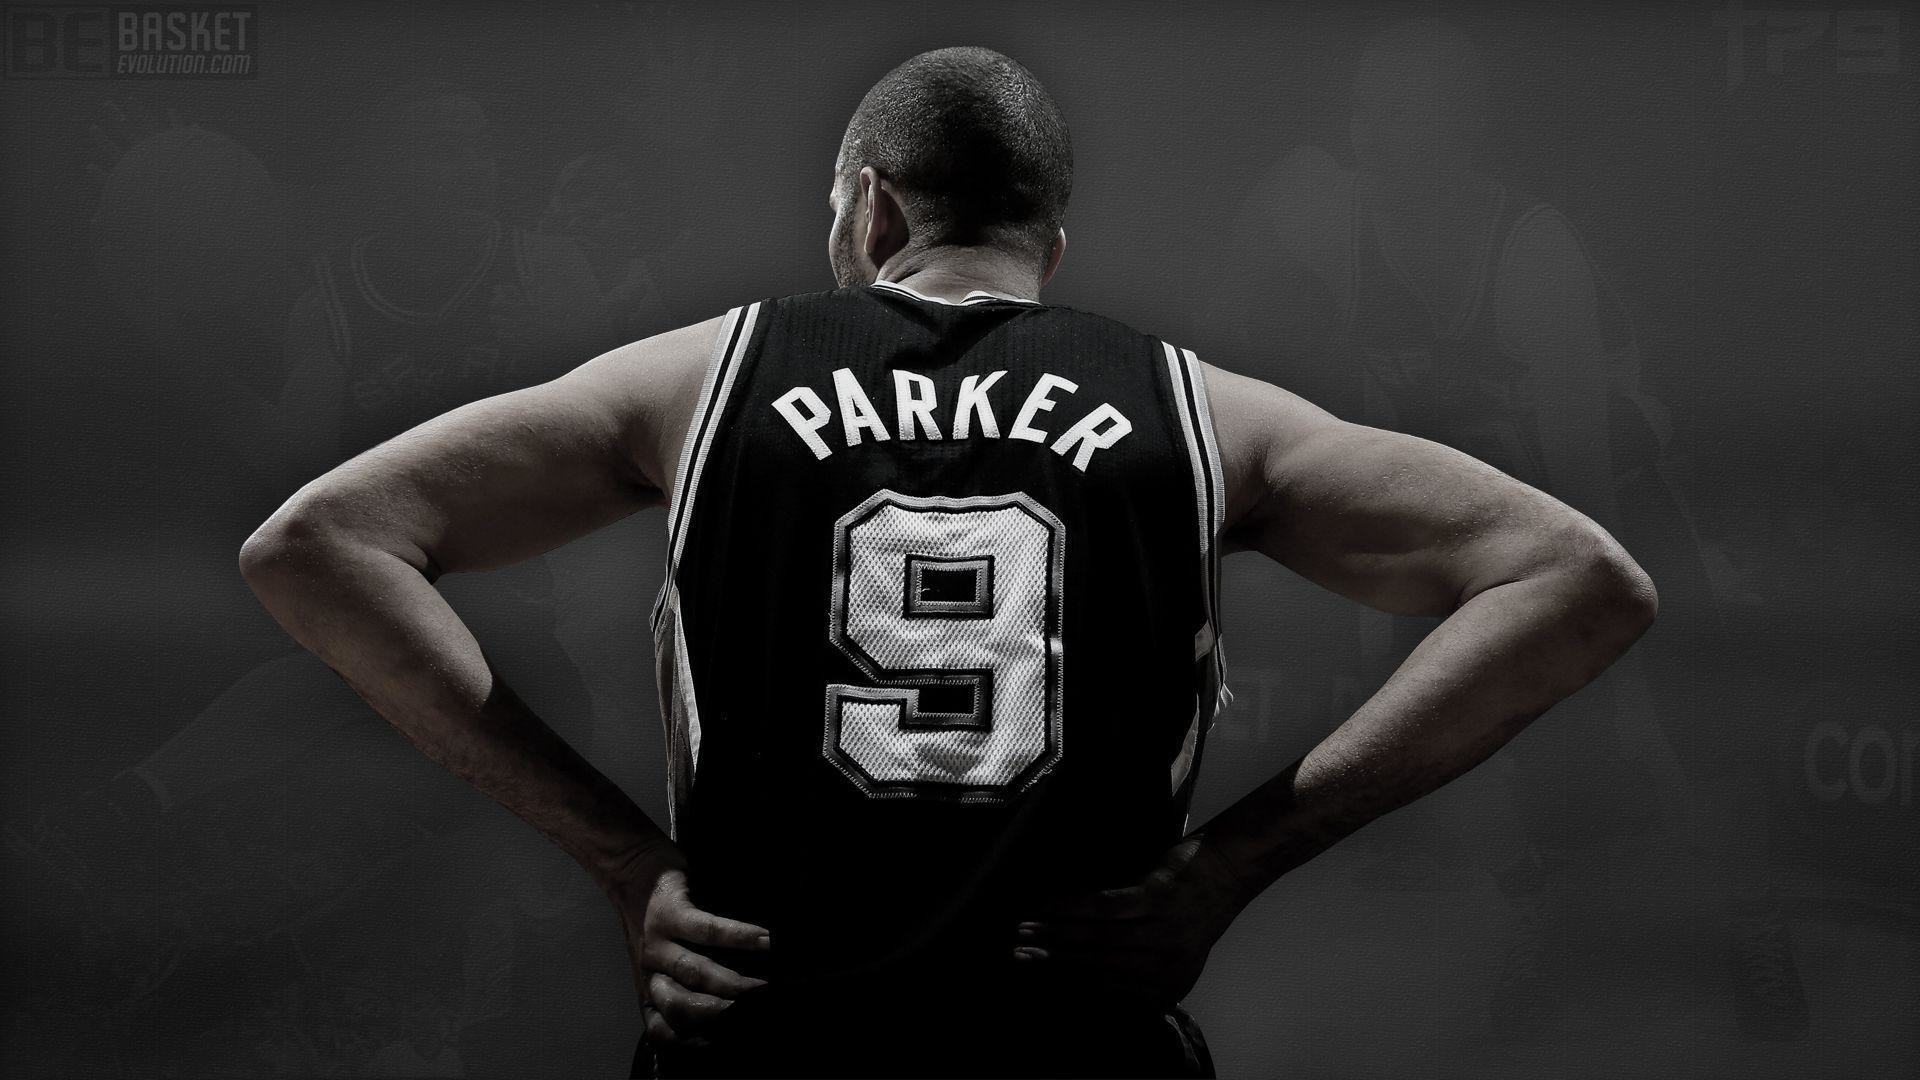 1920x1080  Basketball player Tony Parker wallpapers and images - wallpapers .